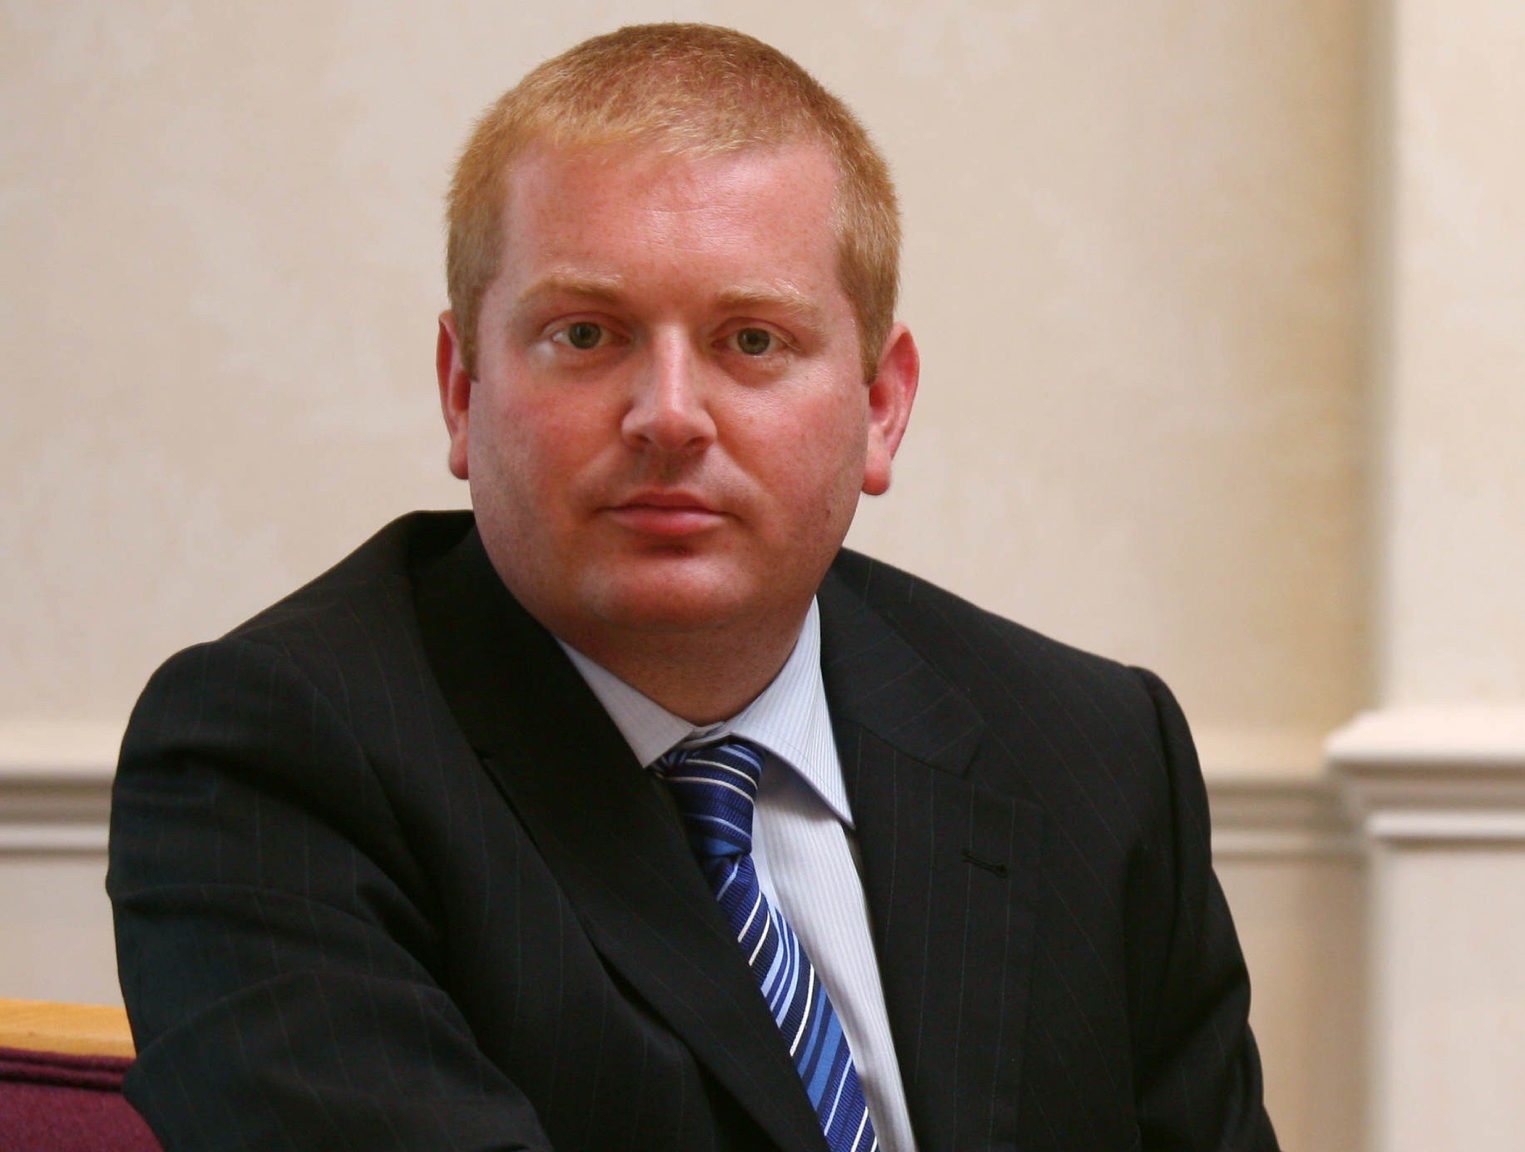 Colin Borland, the Federation of Small Businesses' head of external affairs in Scotland